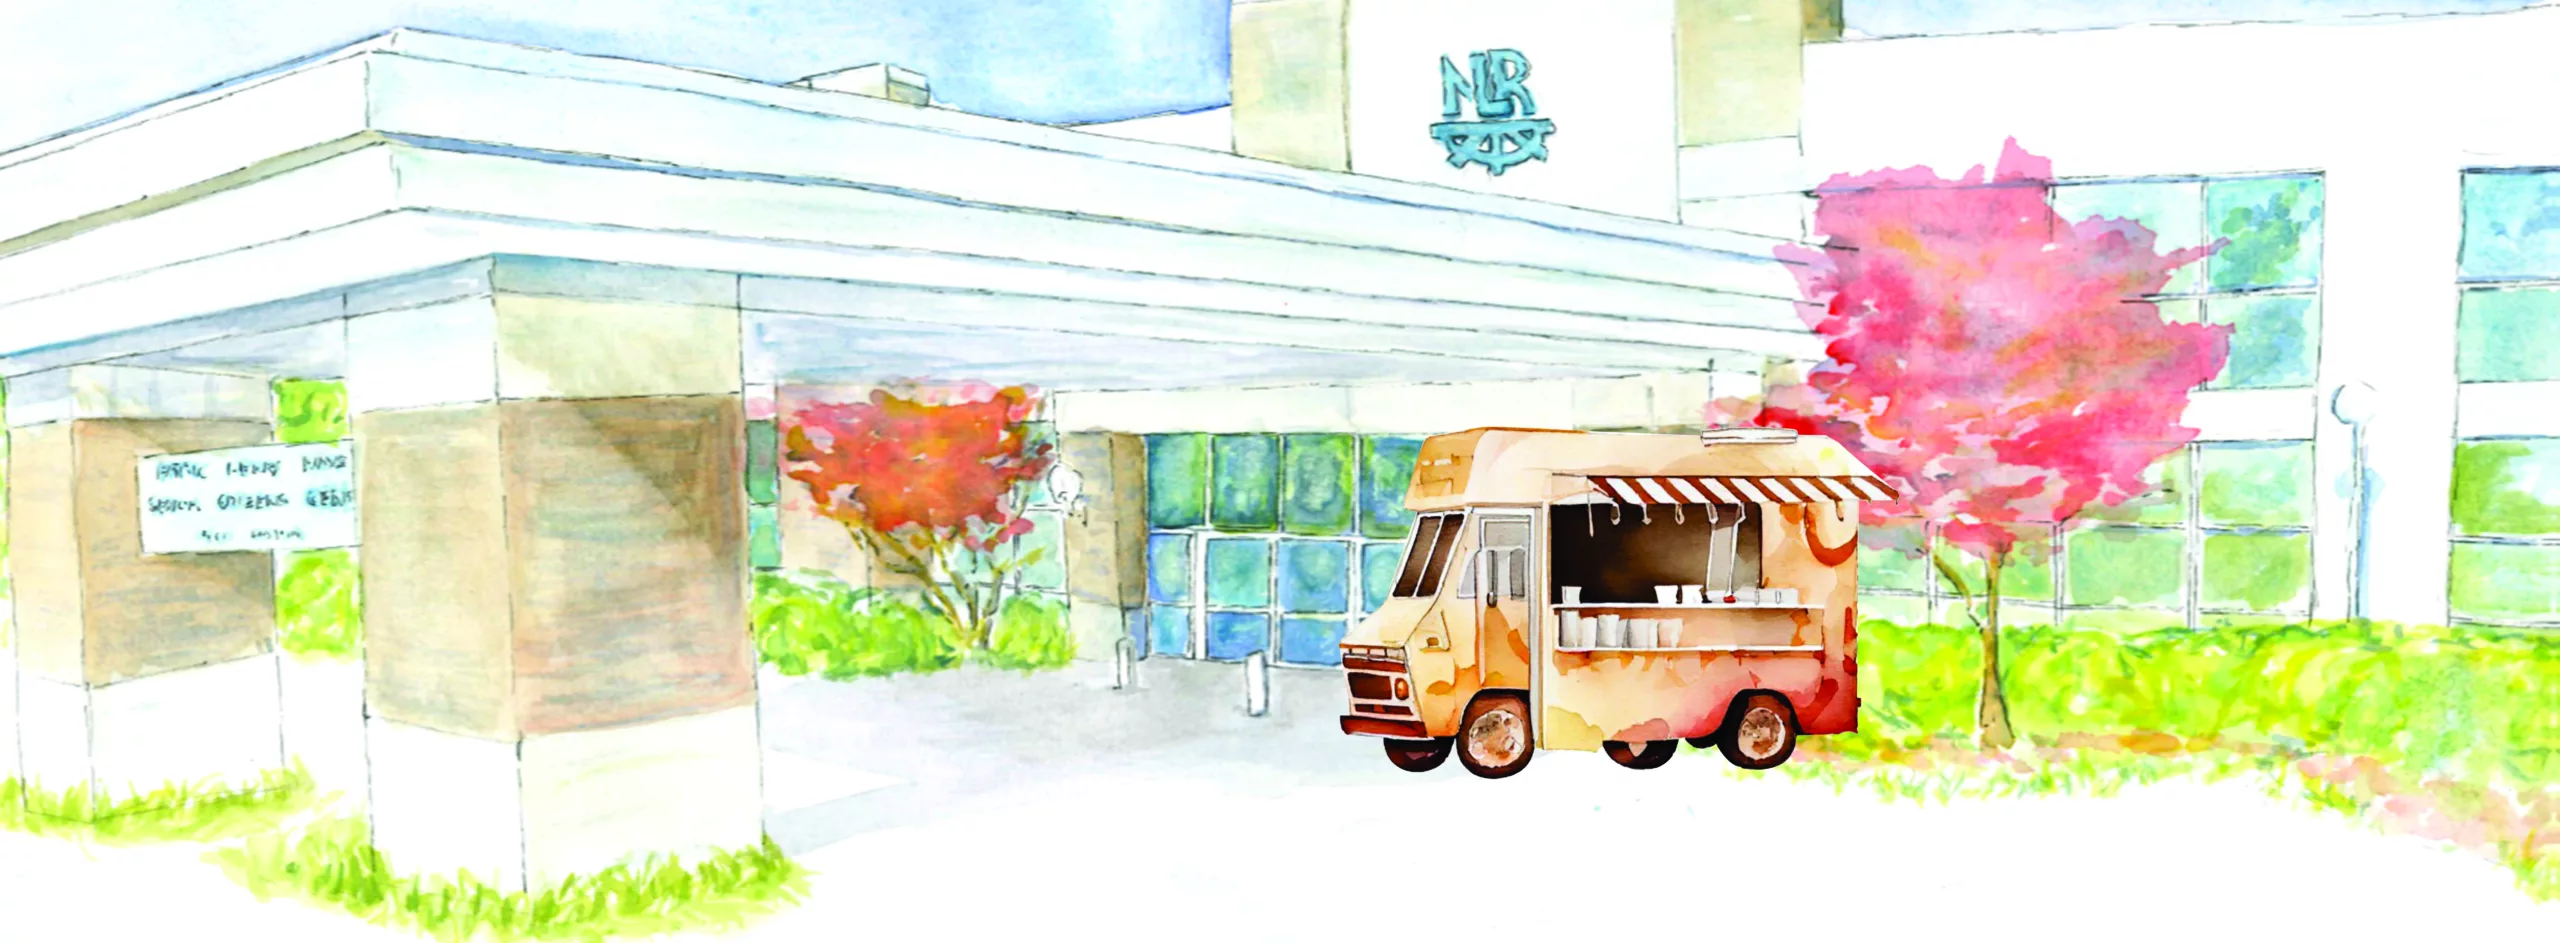 image of hays center with food truck